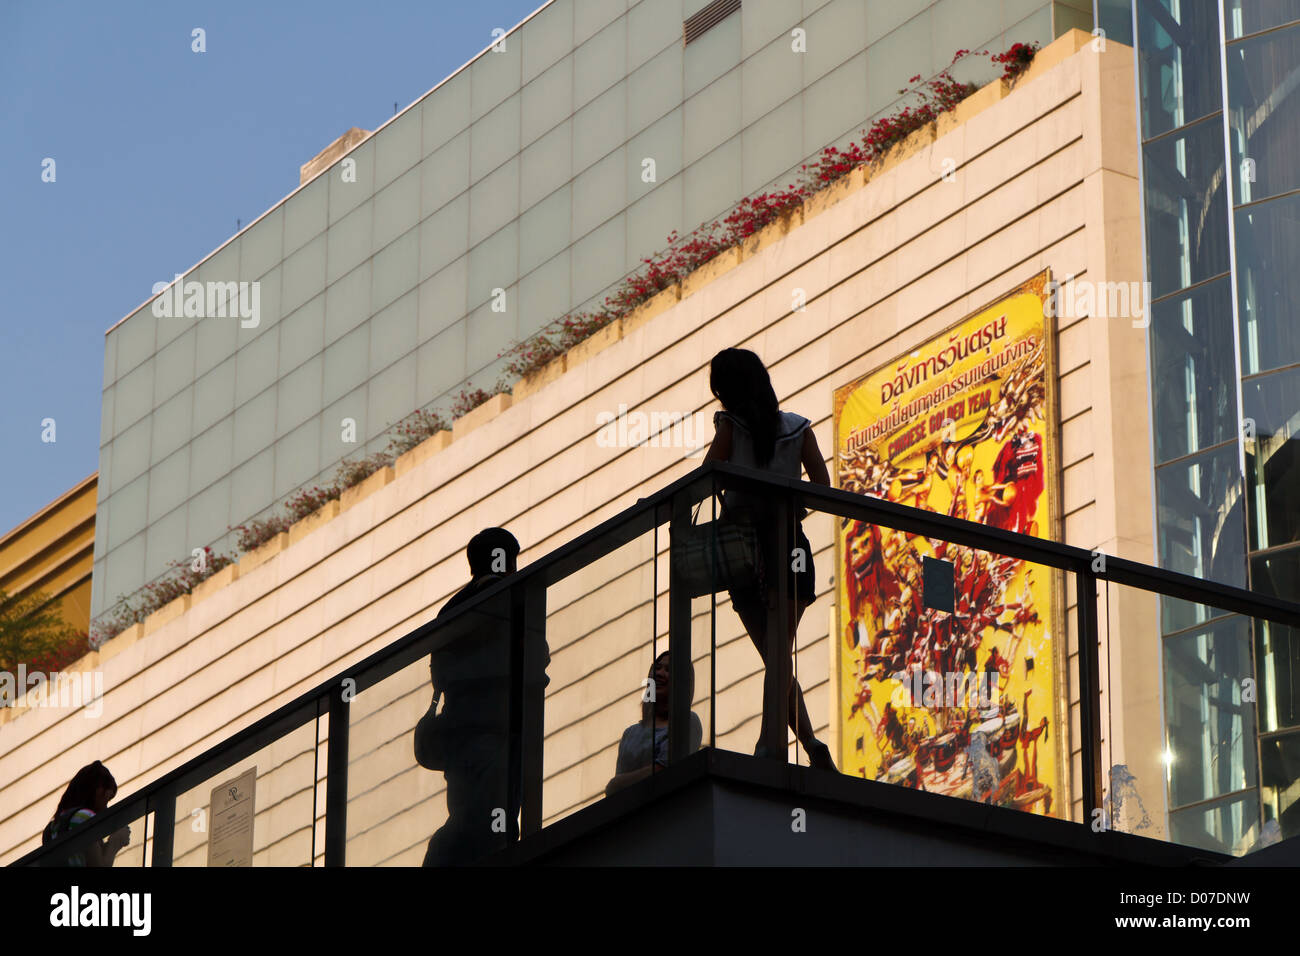 Silhouette of Women on a Balustrade at Siam Square in Bangkok, Thailand Stock Photo